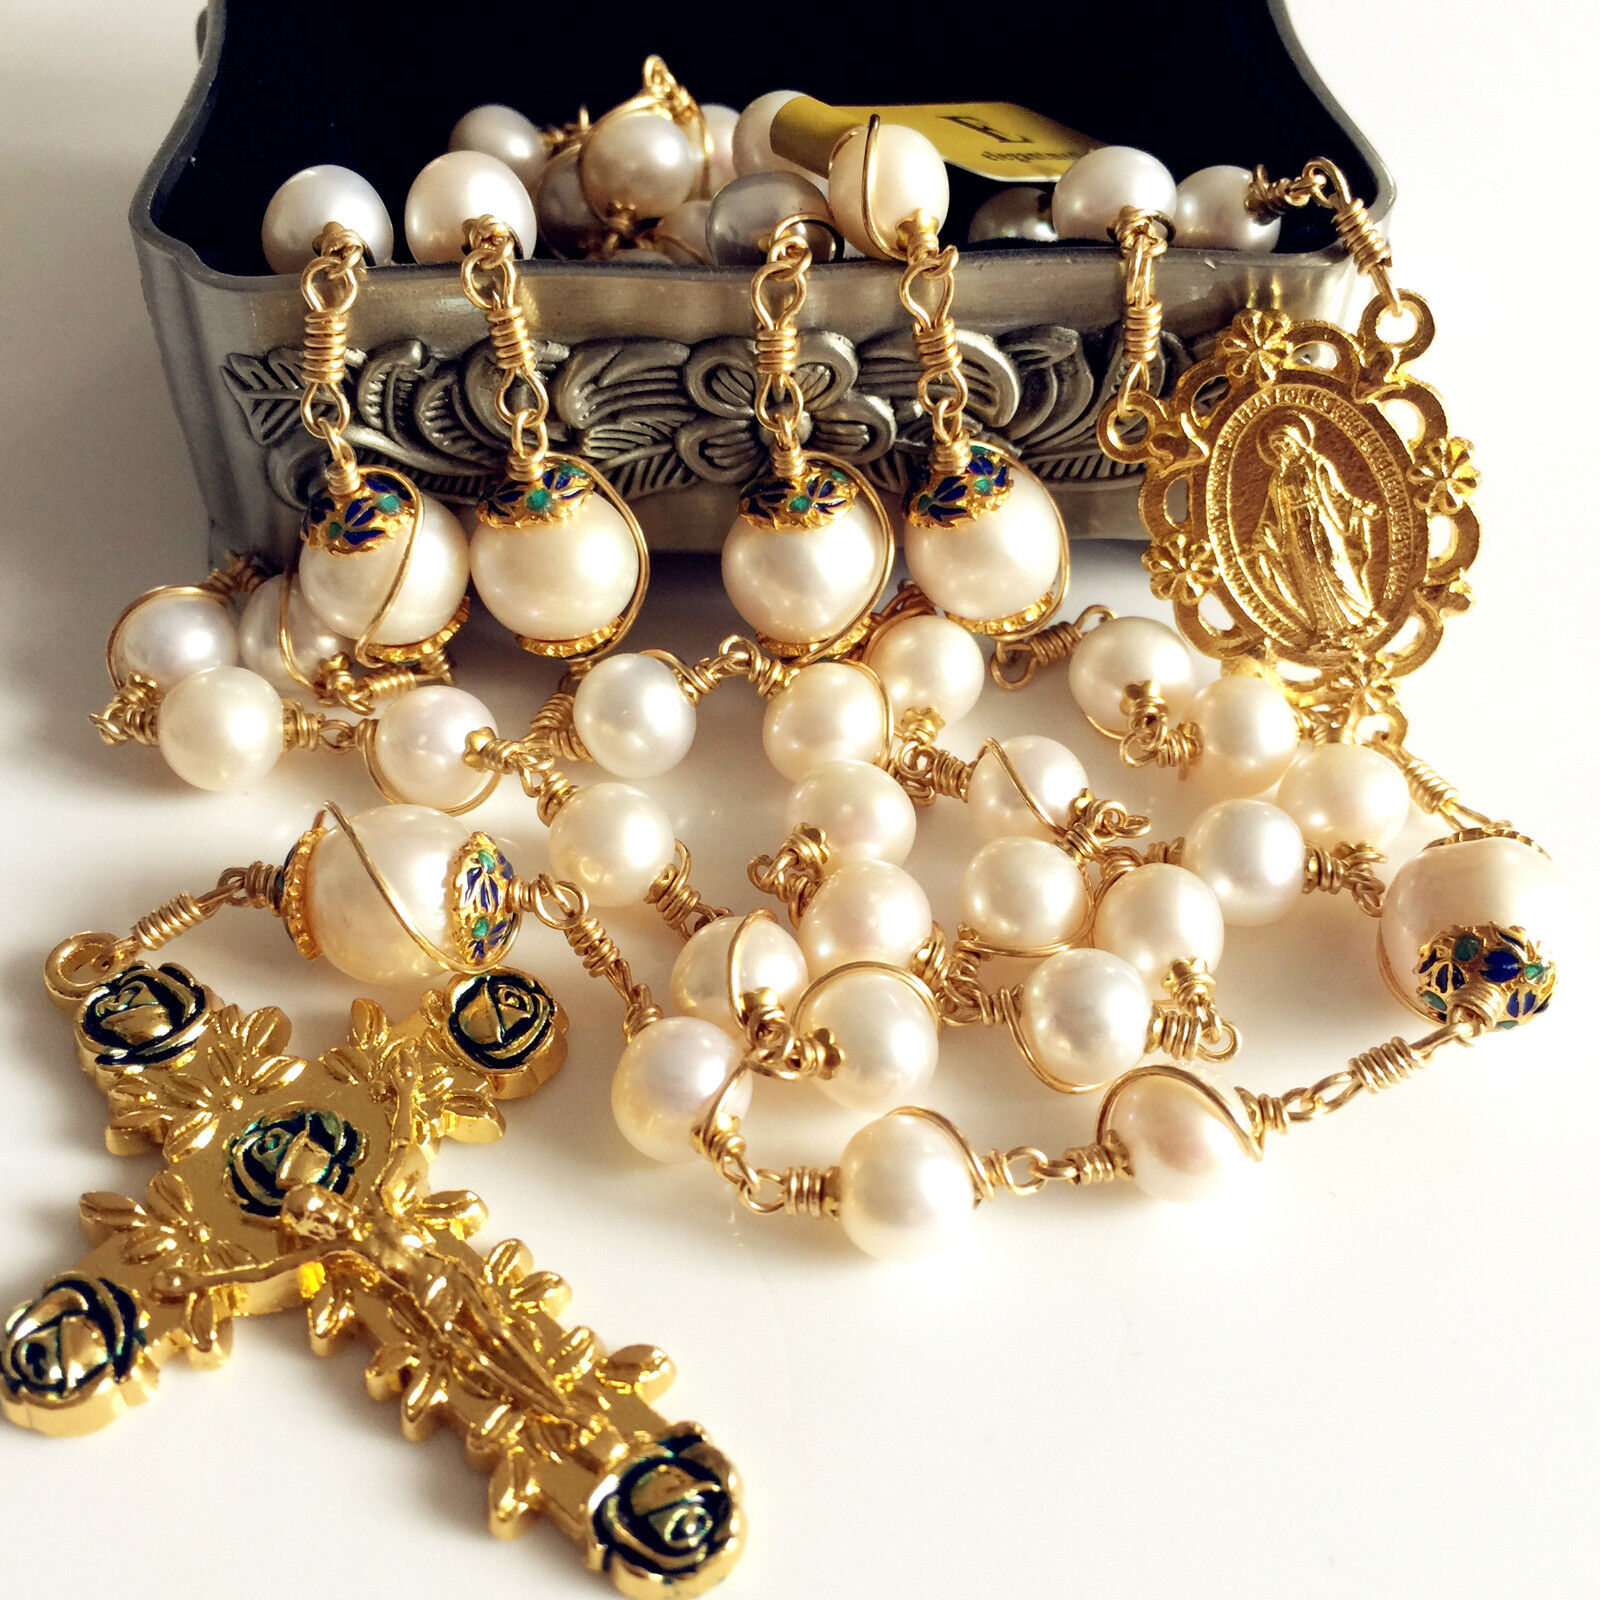 Gold Wire Wrap Bead AAA+ White Real Pearl Catholic Rosary Necklace Cross Box